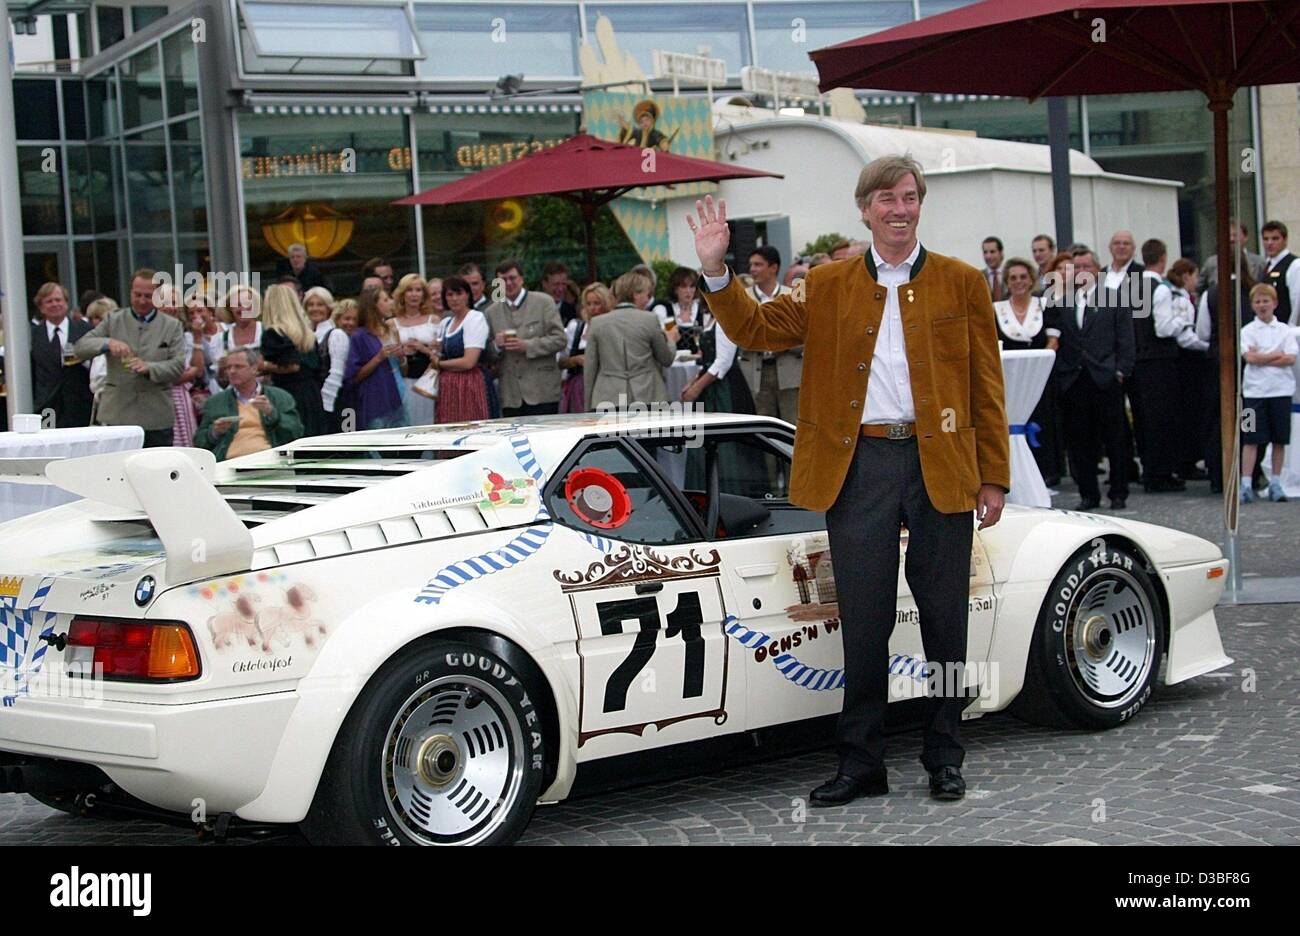 (dpa) - Prince Leopold of Bavaria, well-known as an enthusiastic automobil racer, poses in front of his race car at his birthday party in Rottach-Egern, Germany, 28 June 2003. Prince Leopold, or Poldi as his friends call him, invited royals and important people from film and economy to celebrate his Stock Photo